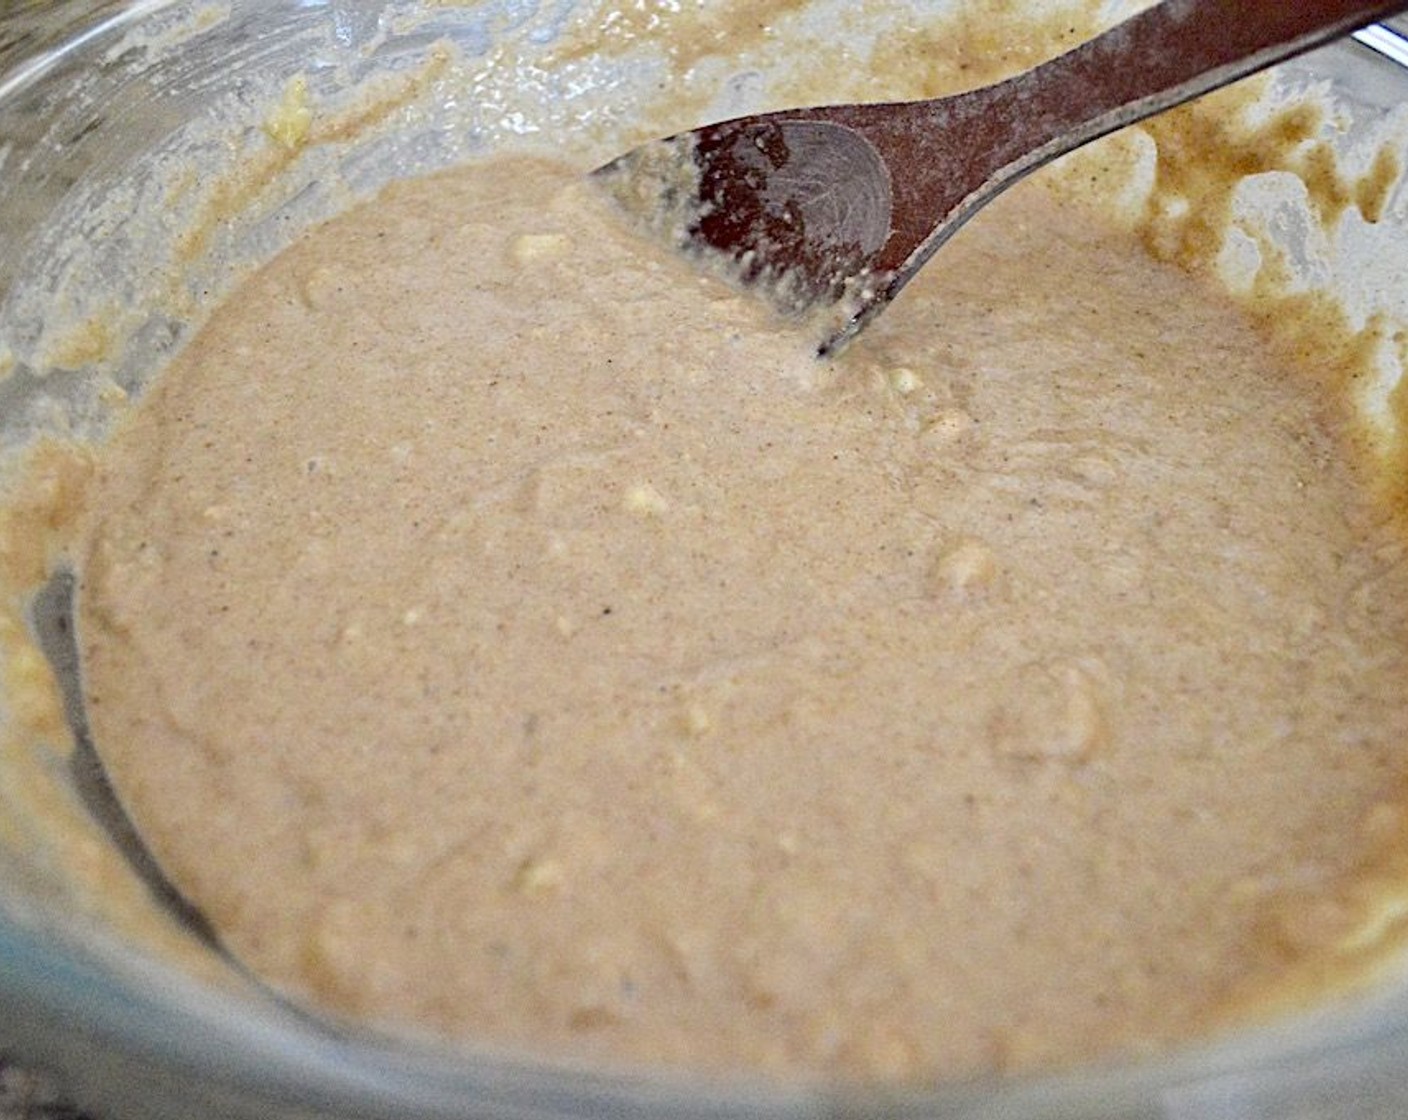 step 4 Combine the wet and dry ingredients. Stir together until just combined into a thick batter.